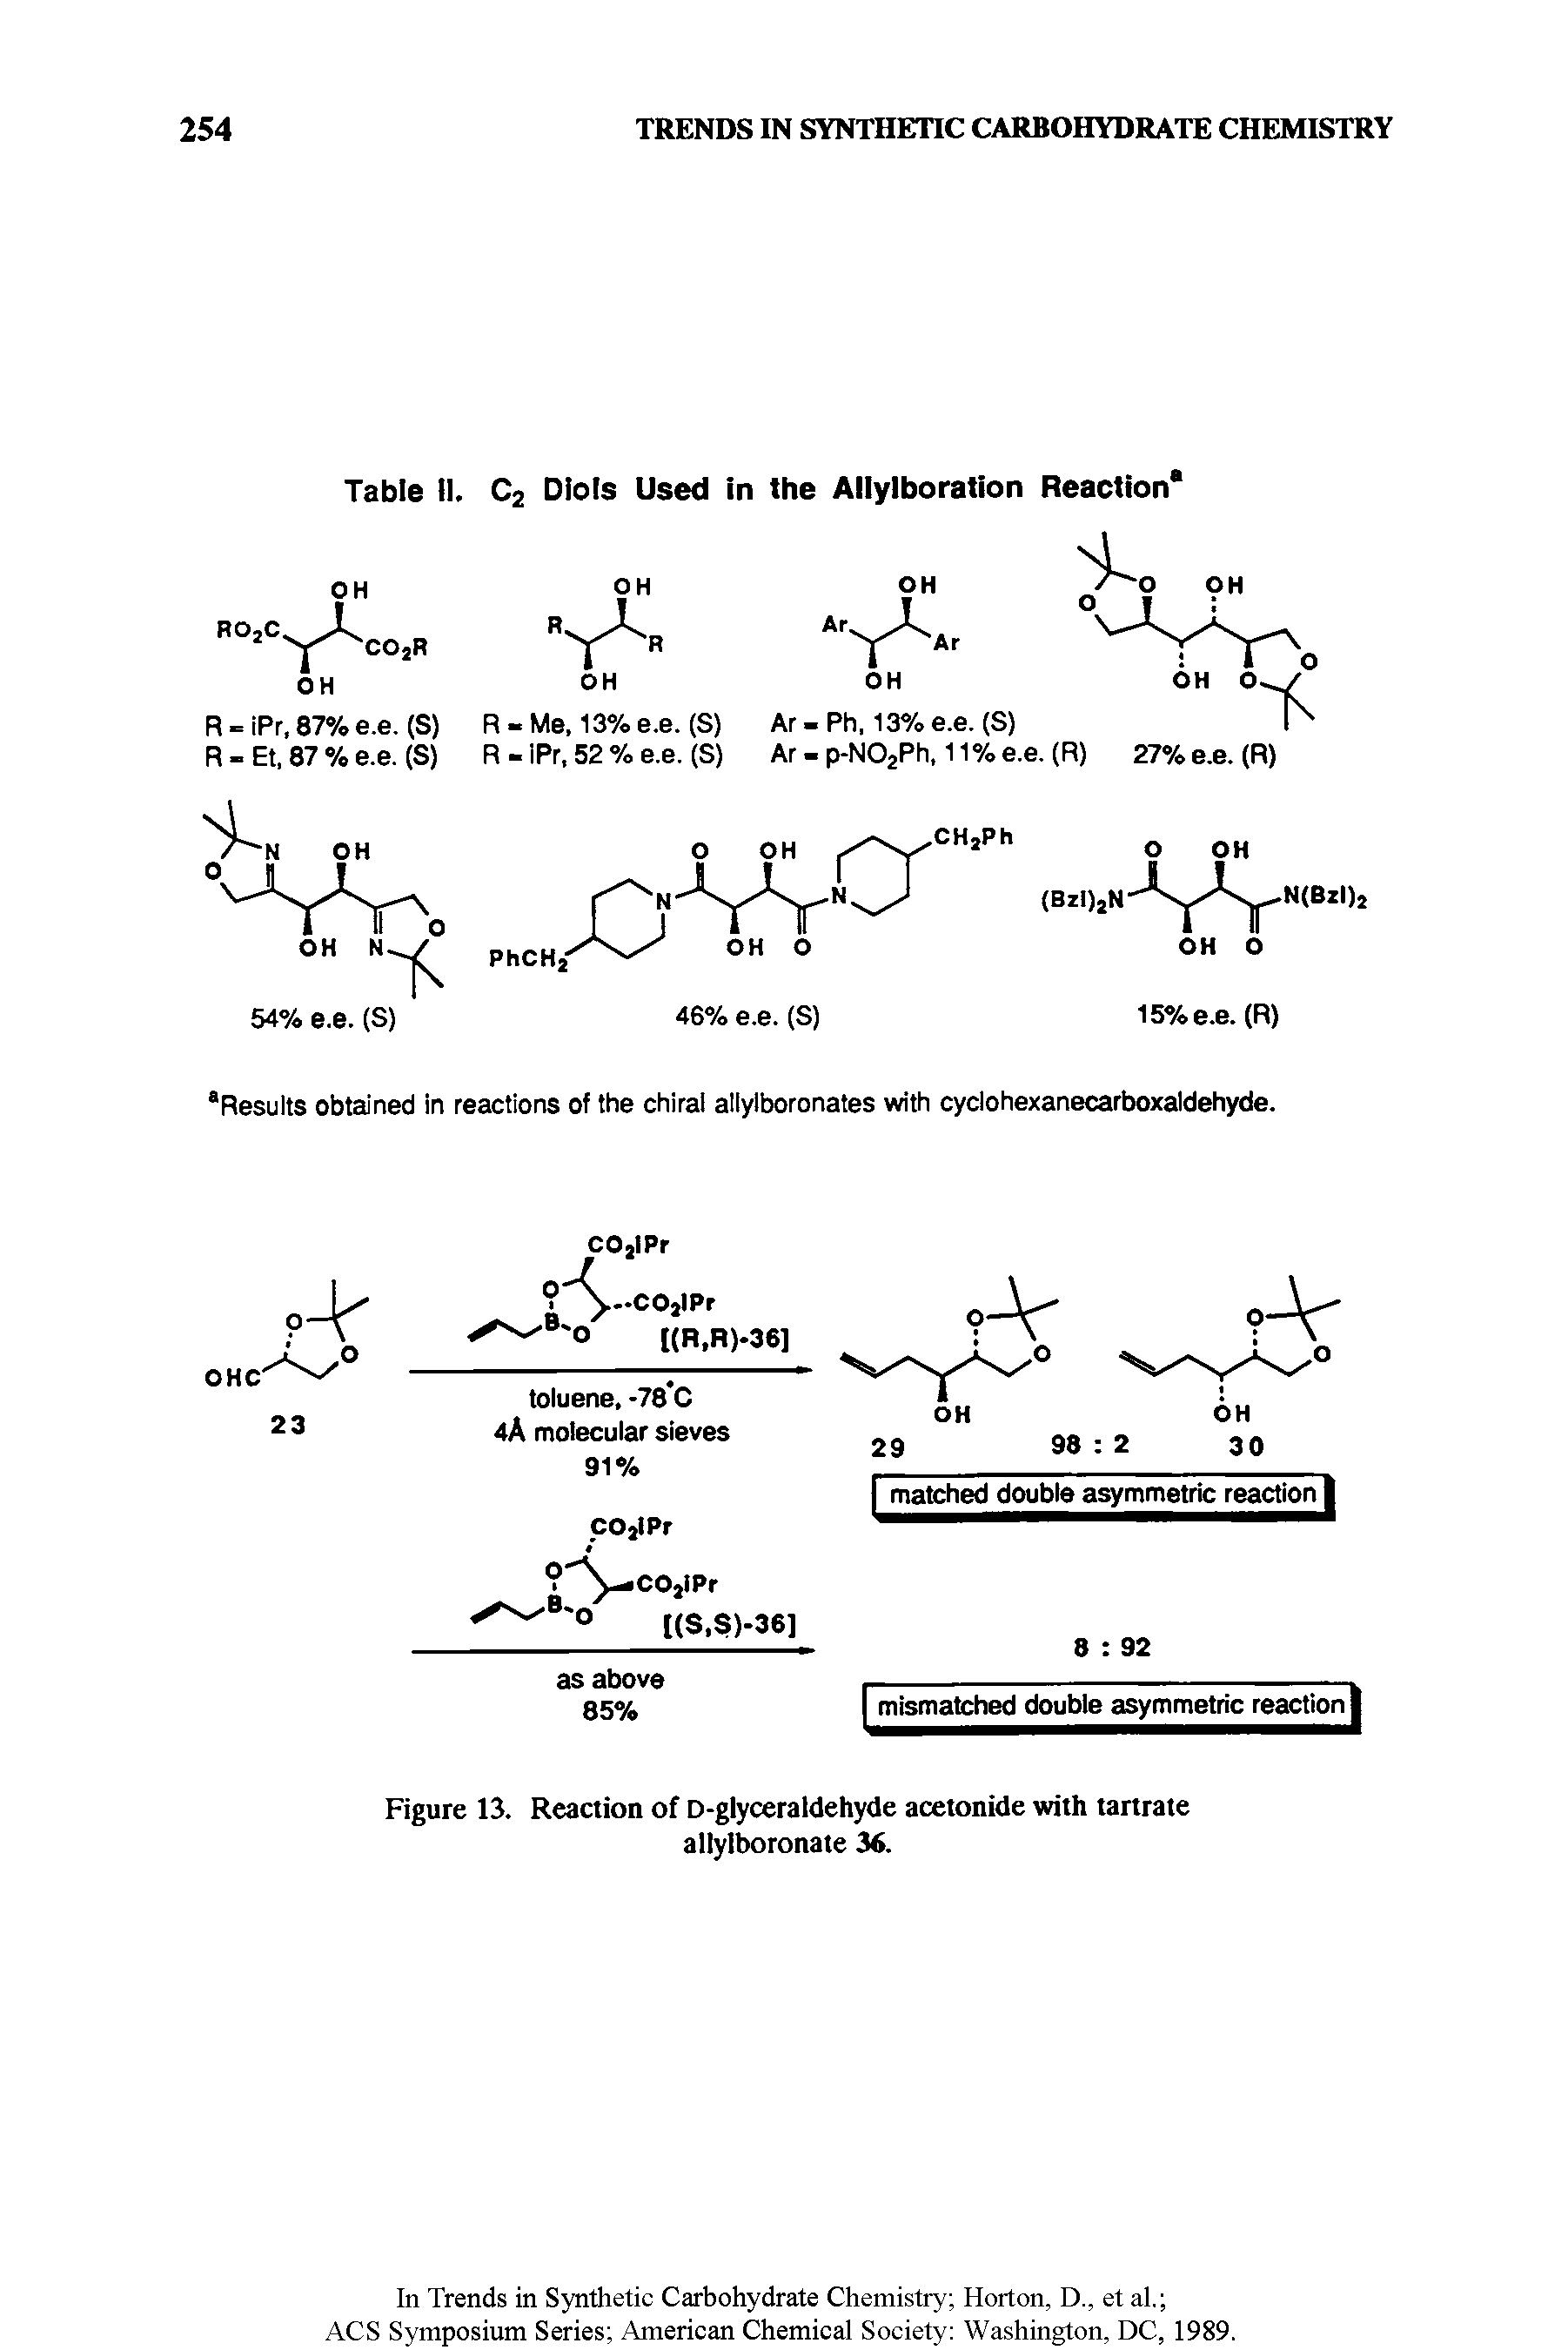 Figure 13. Reaction of D-glyceraldehyde acetonide with tartrate allylboronate 36.